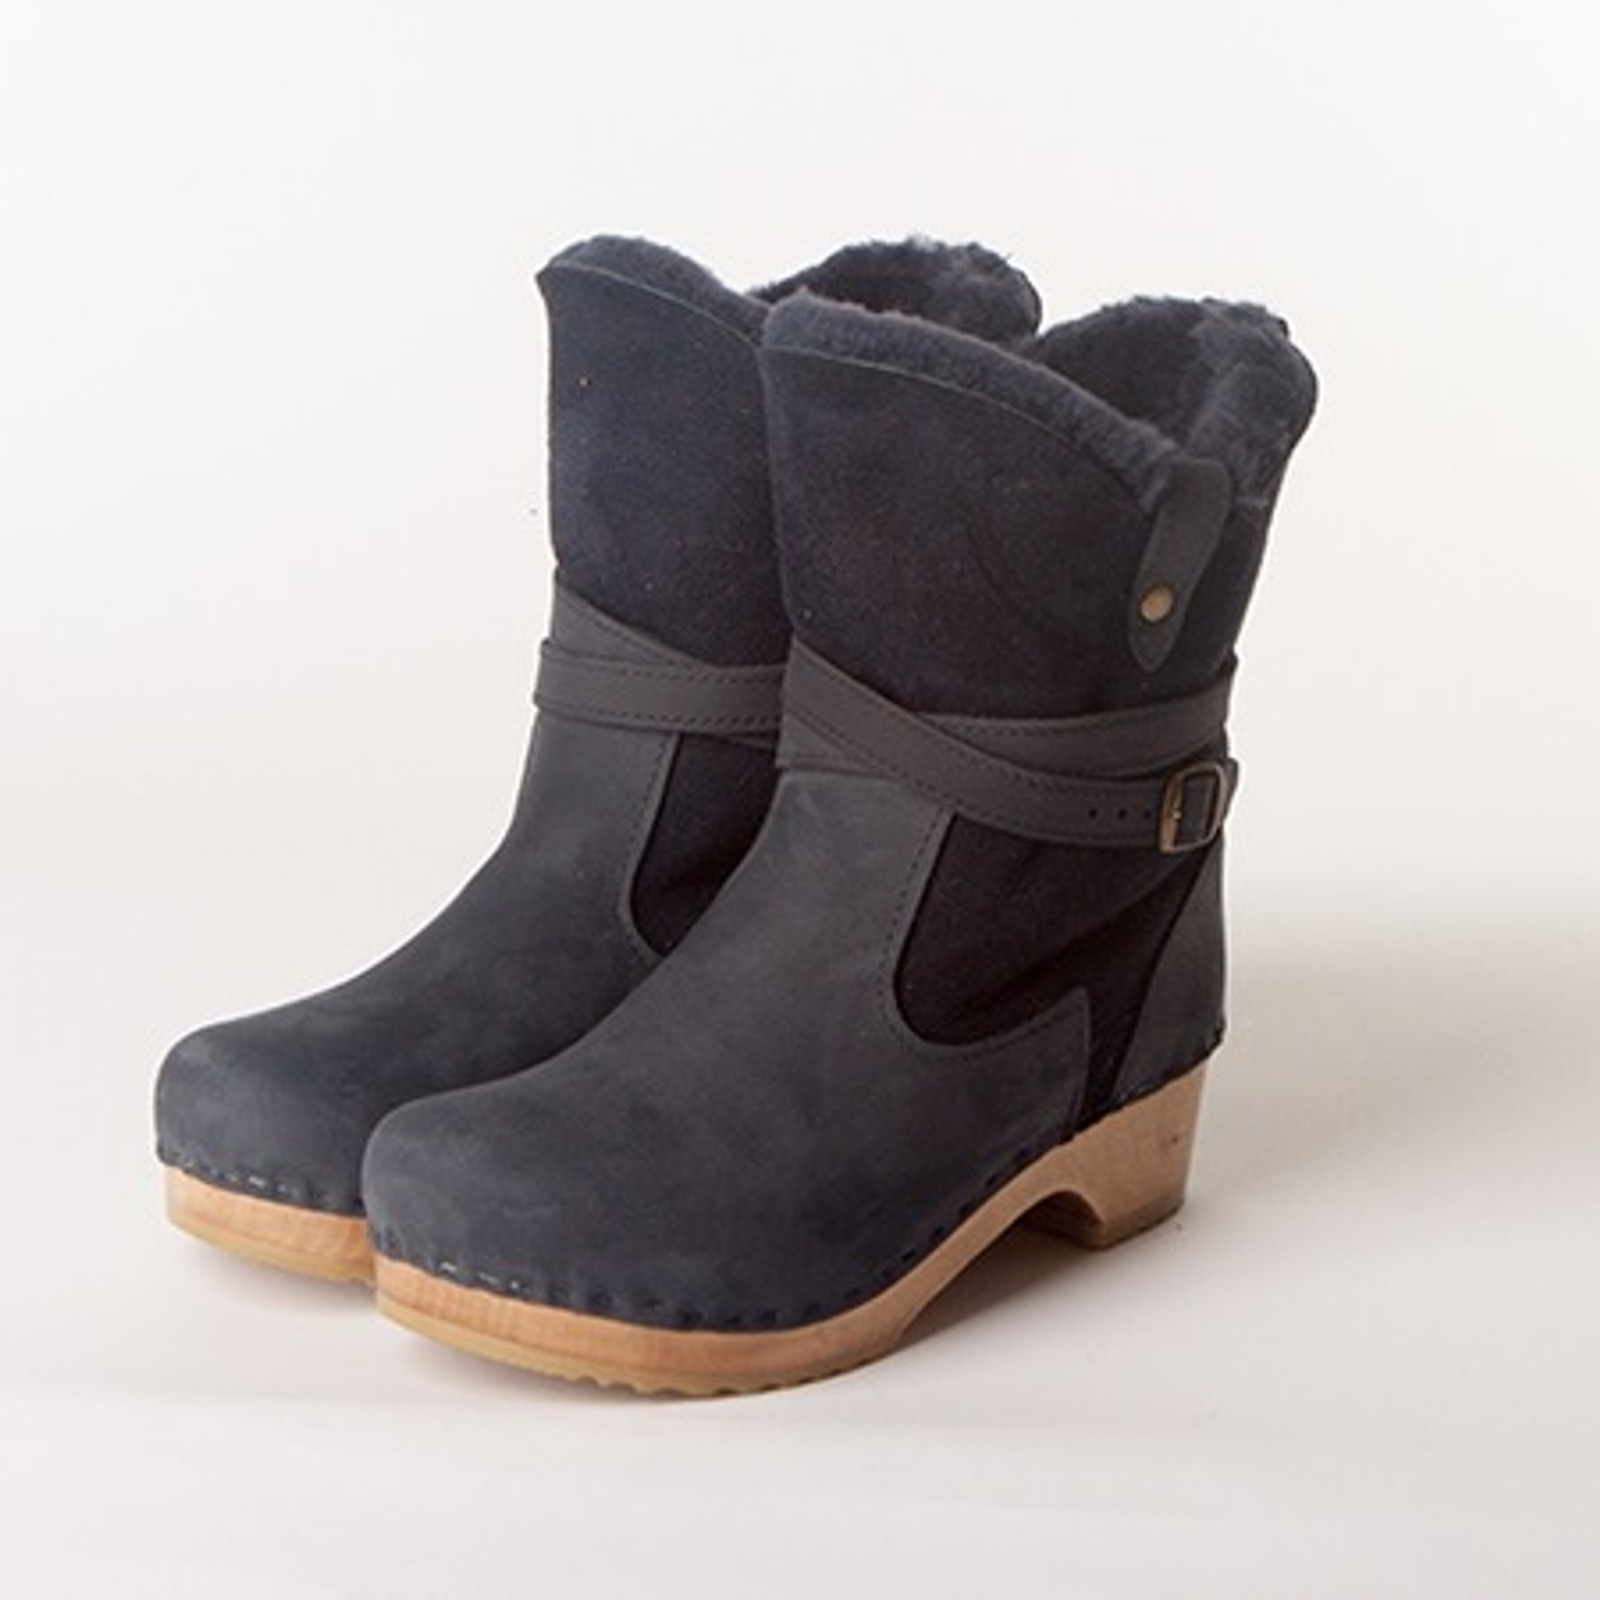 Lucy 7" Navy Boots - Swedish Low Heels